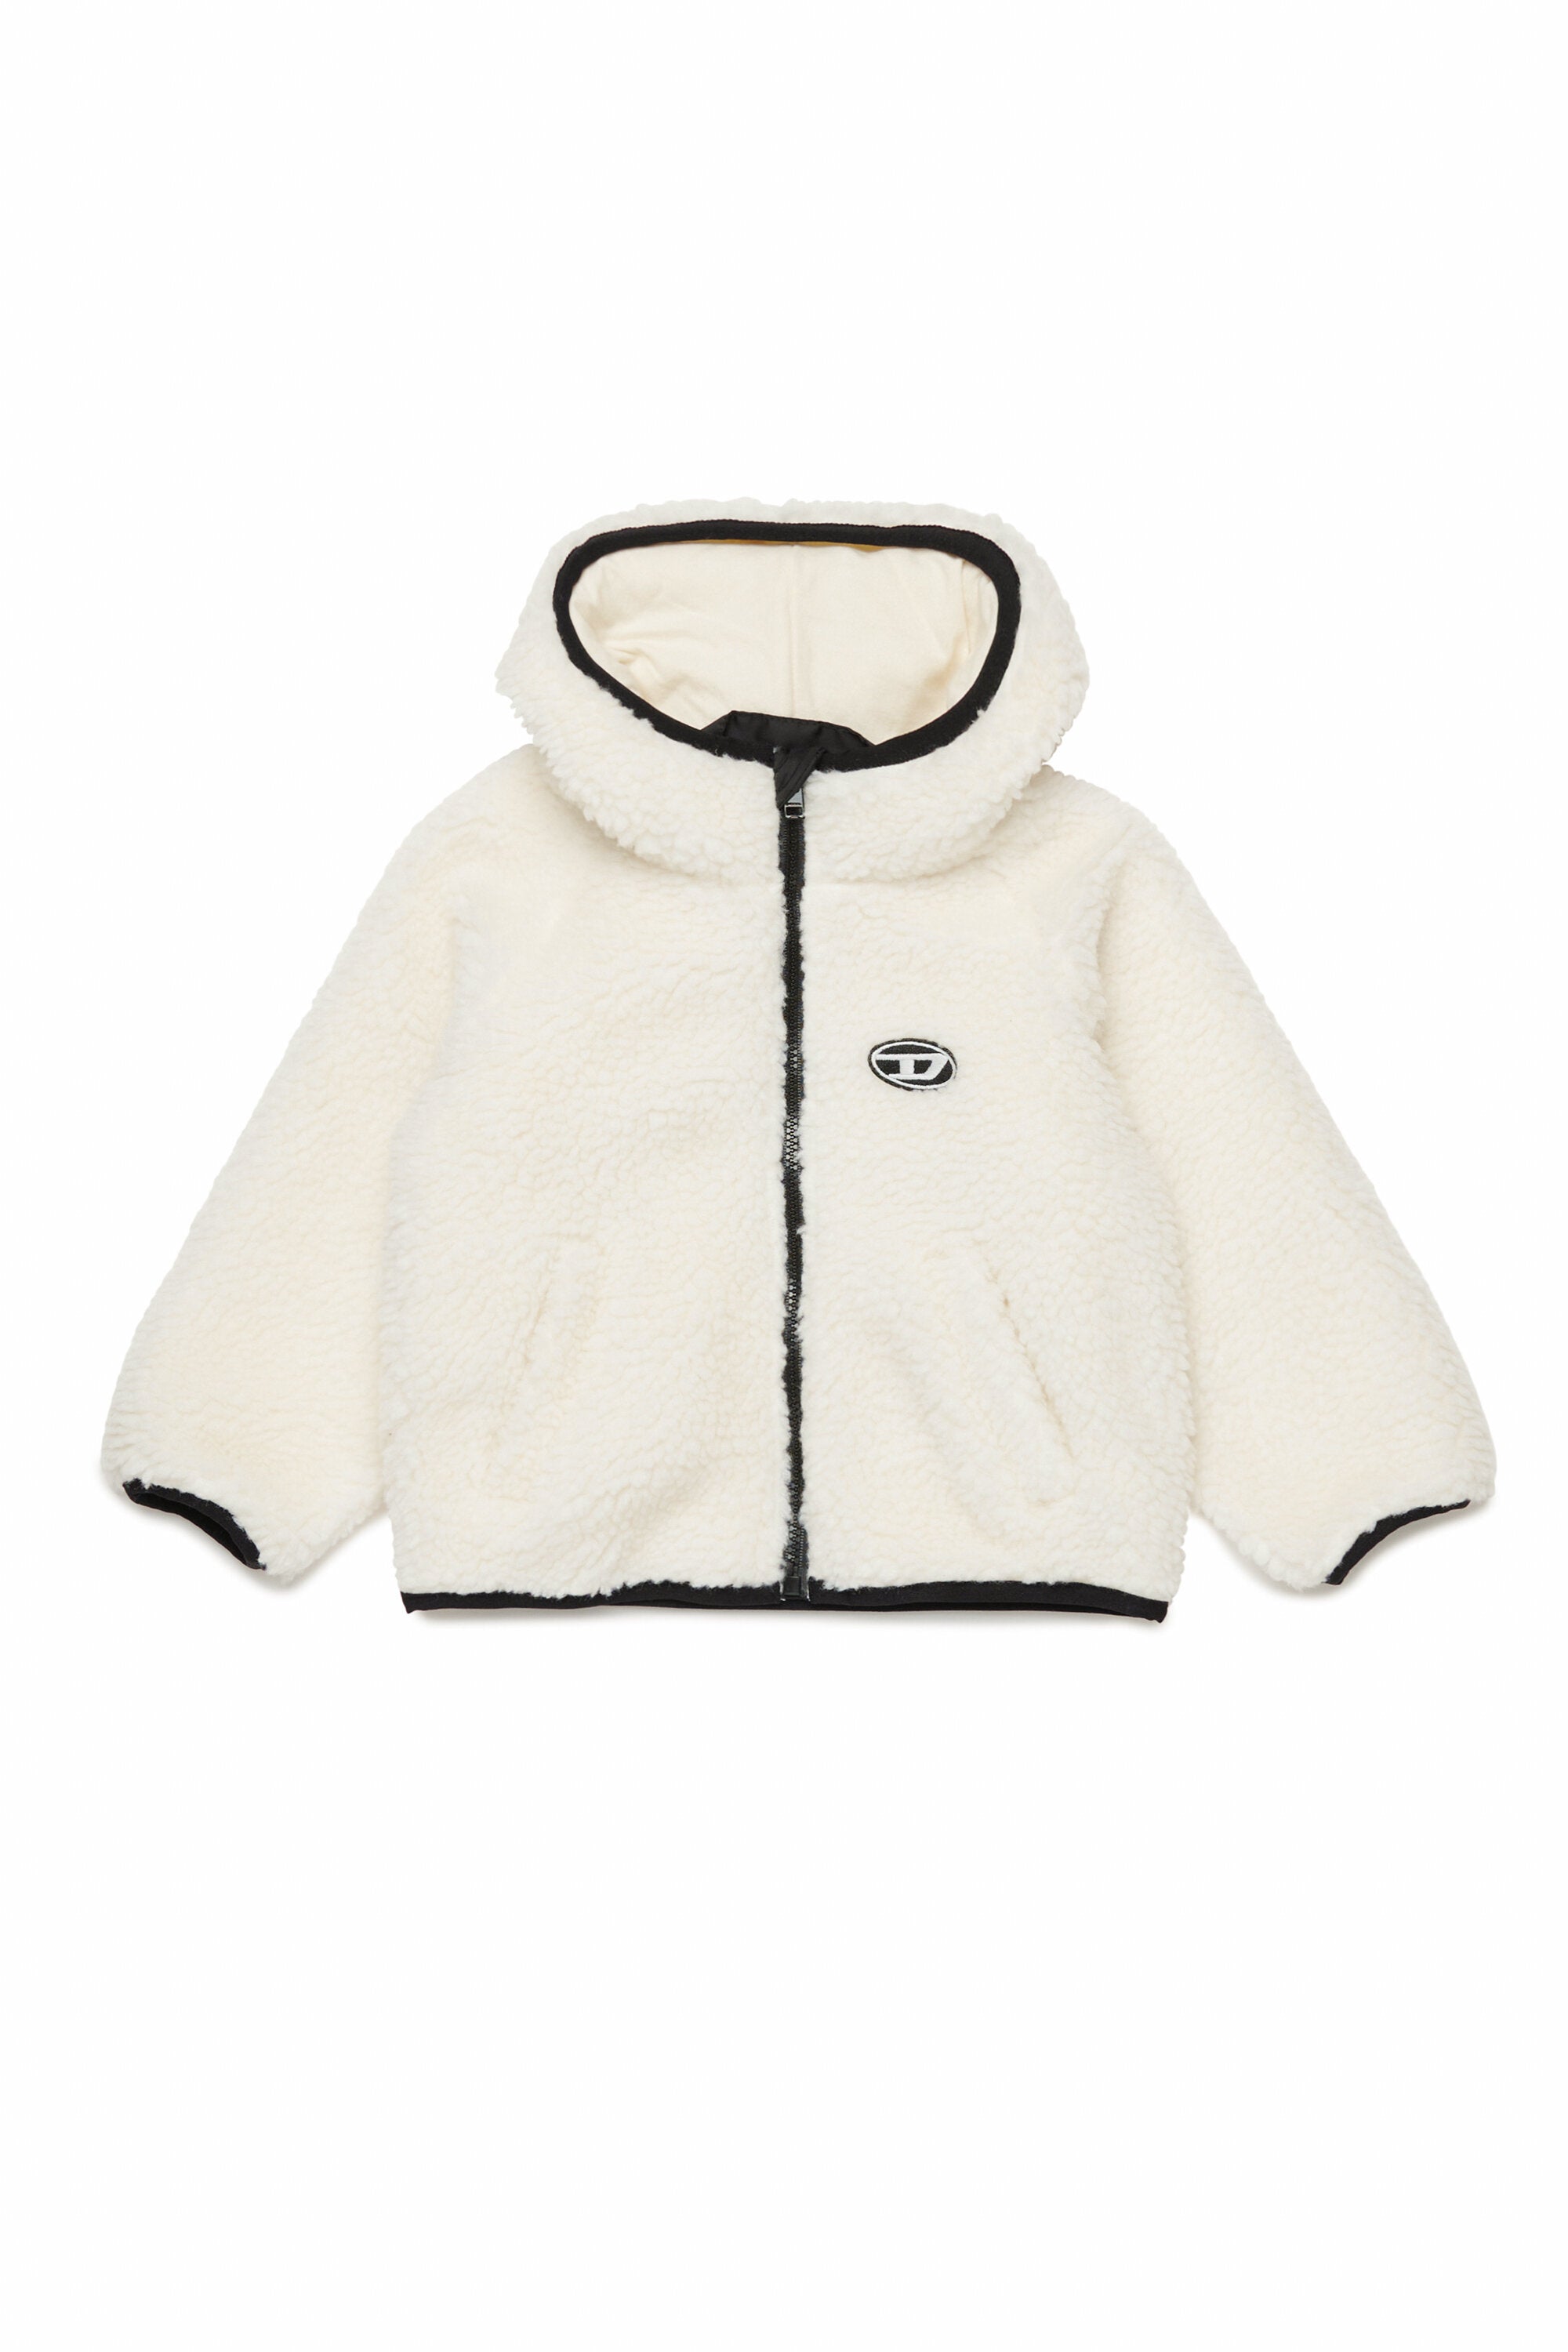 Teddy jacket with oval D patch